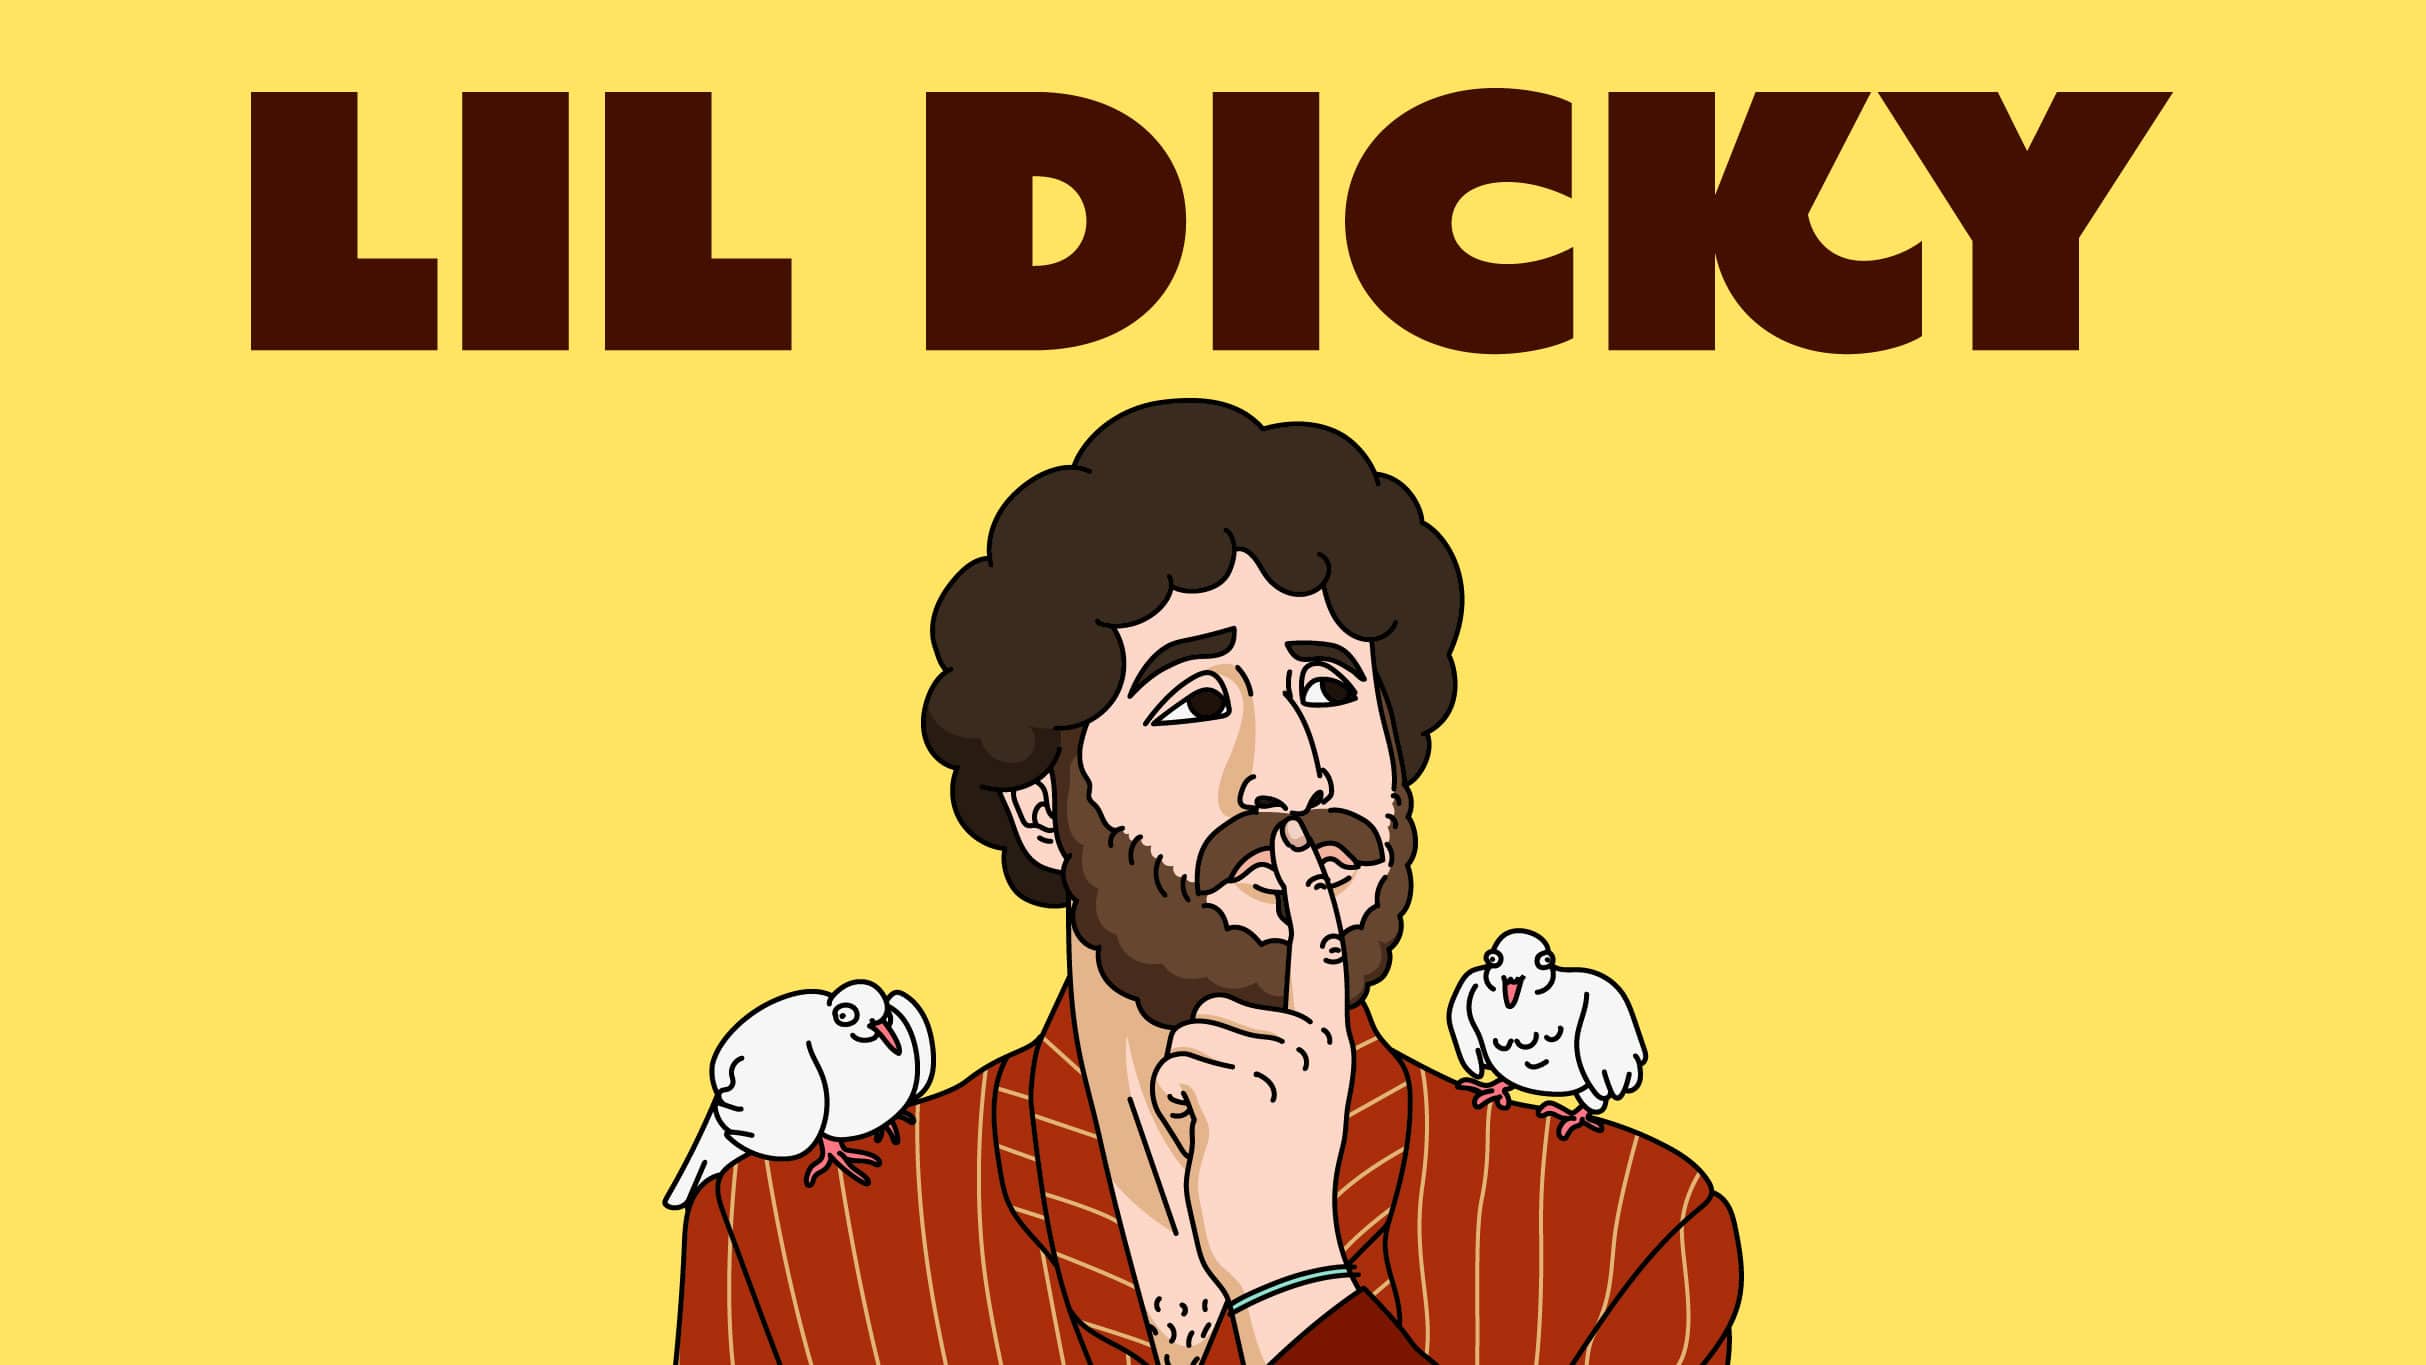 Lil dick. Lil Dicky. Lil Dicky feat Snoop Dogg. Little dick. Hey little dick заставка.